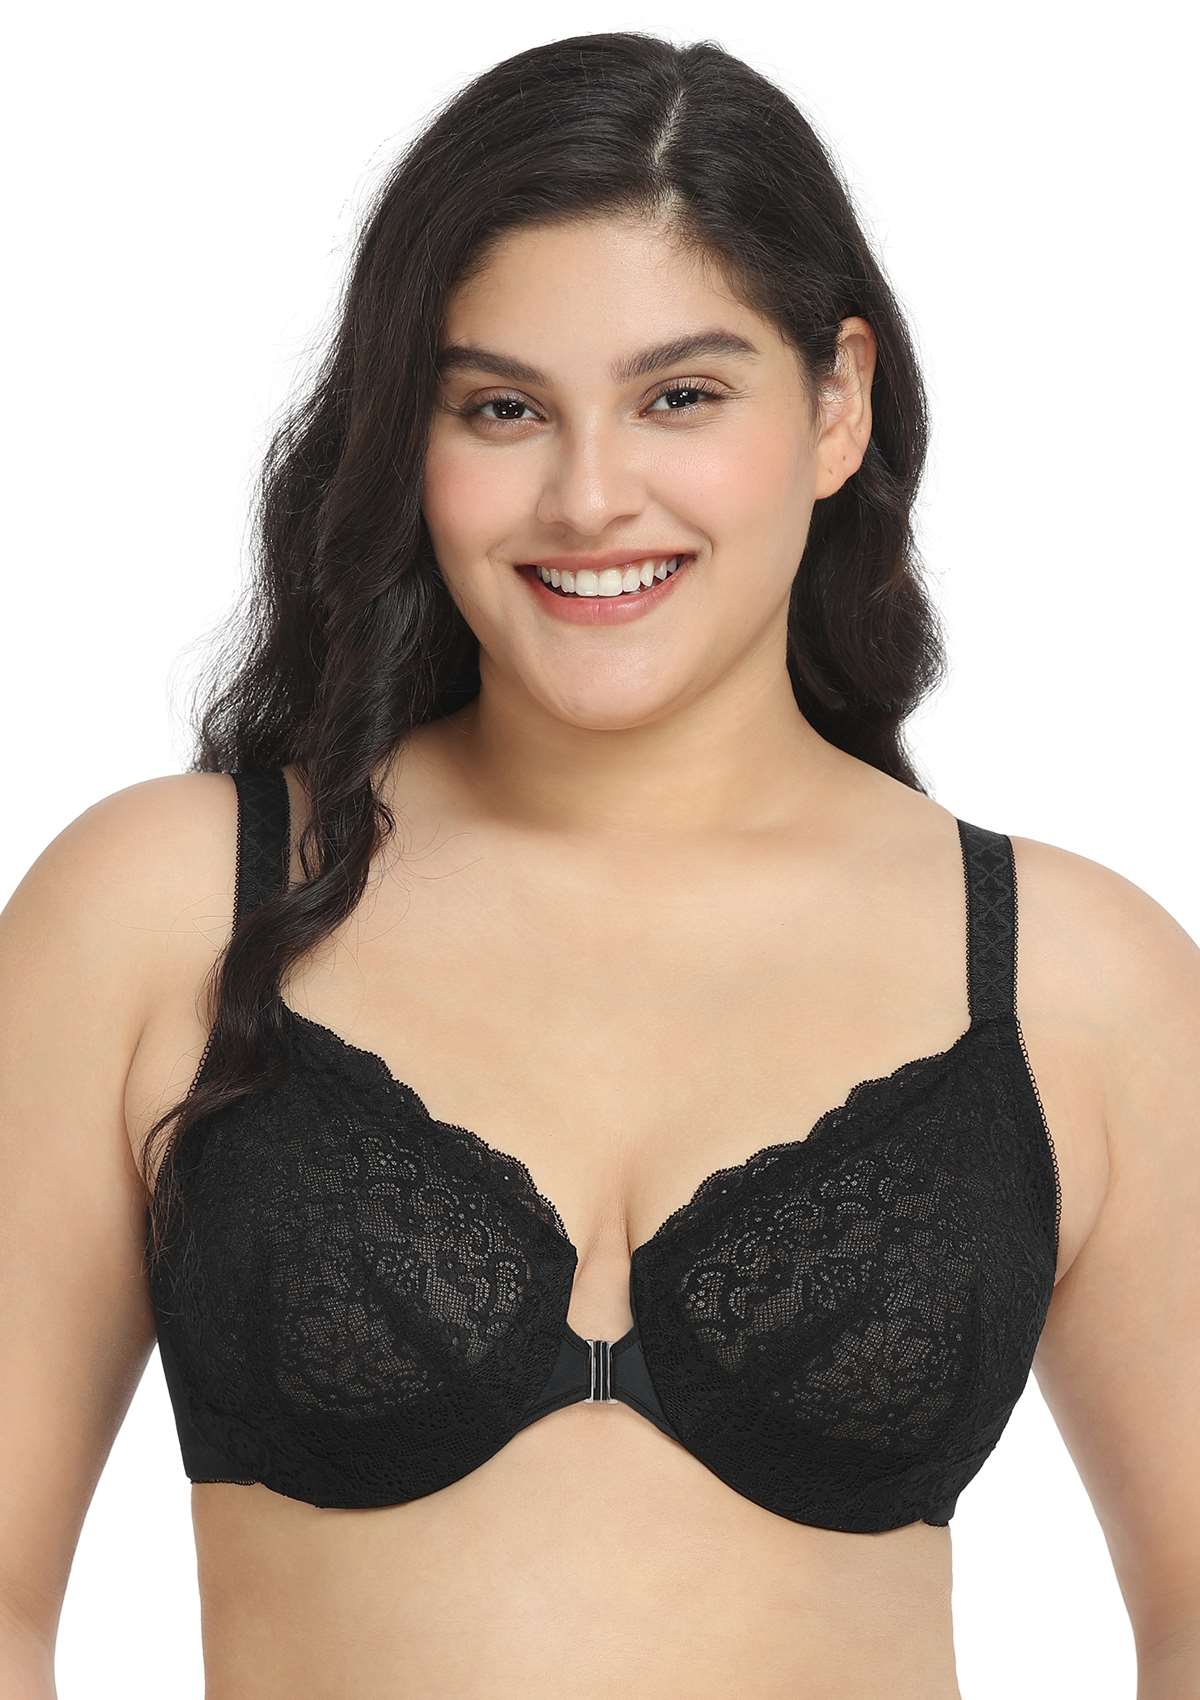 HSIA Nymphaea Front-Close Unlined Retro Floral Lace Back Smoothing Bra - Black / 42 / C